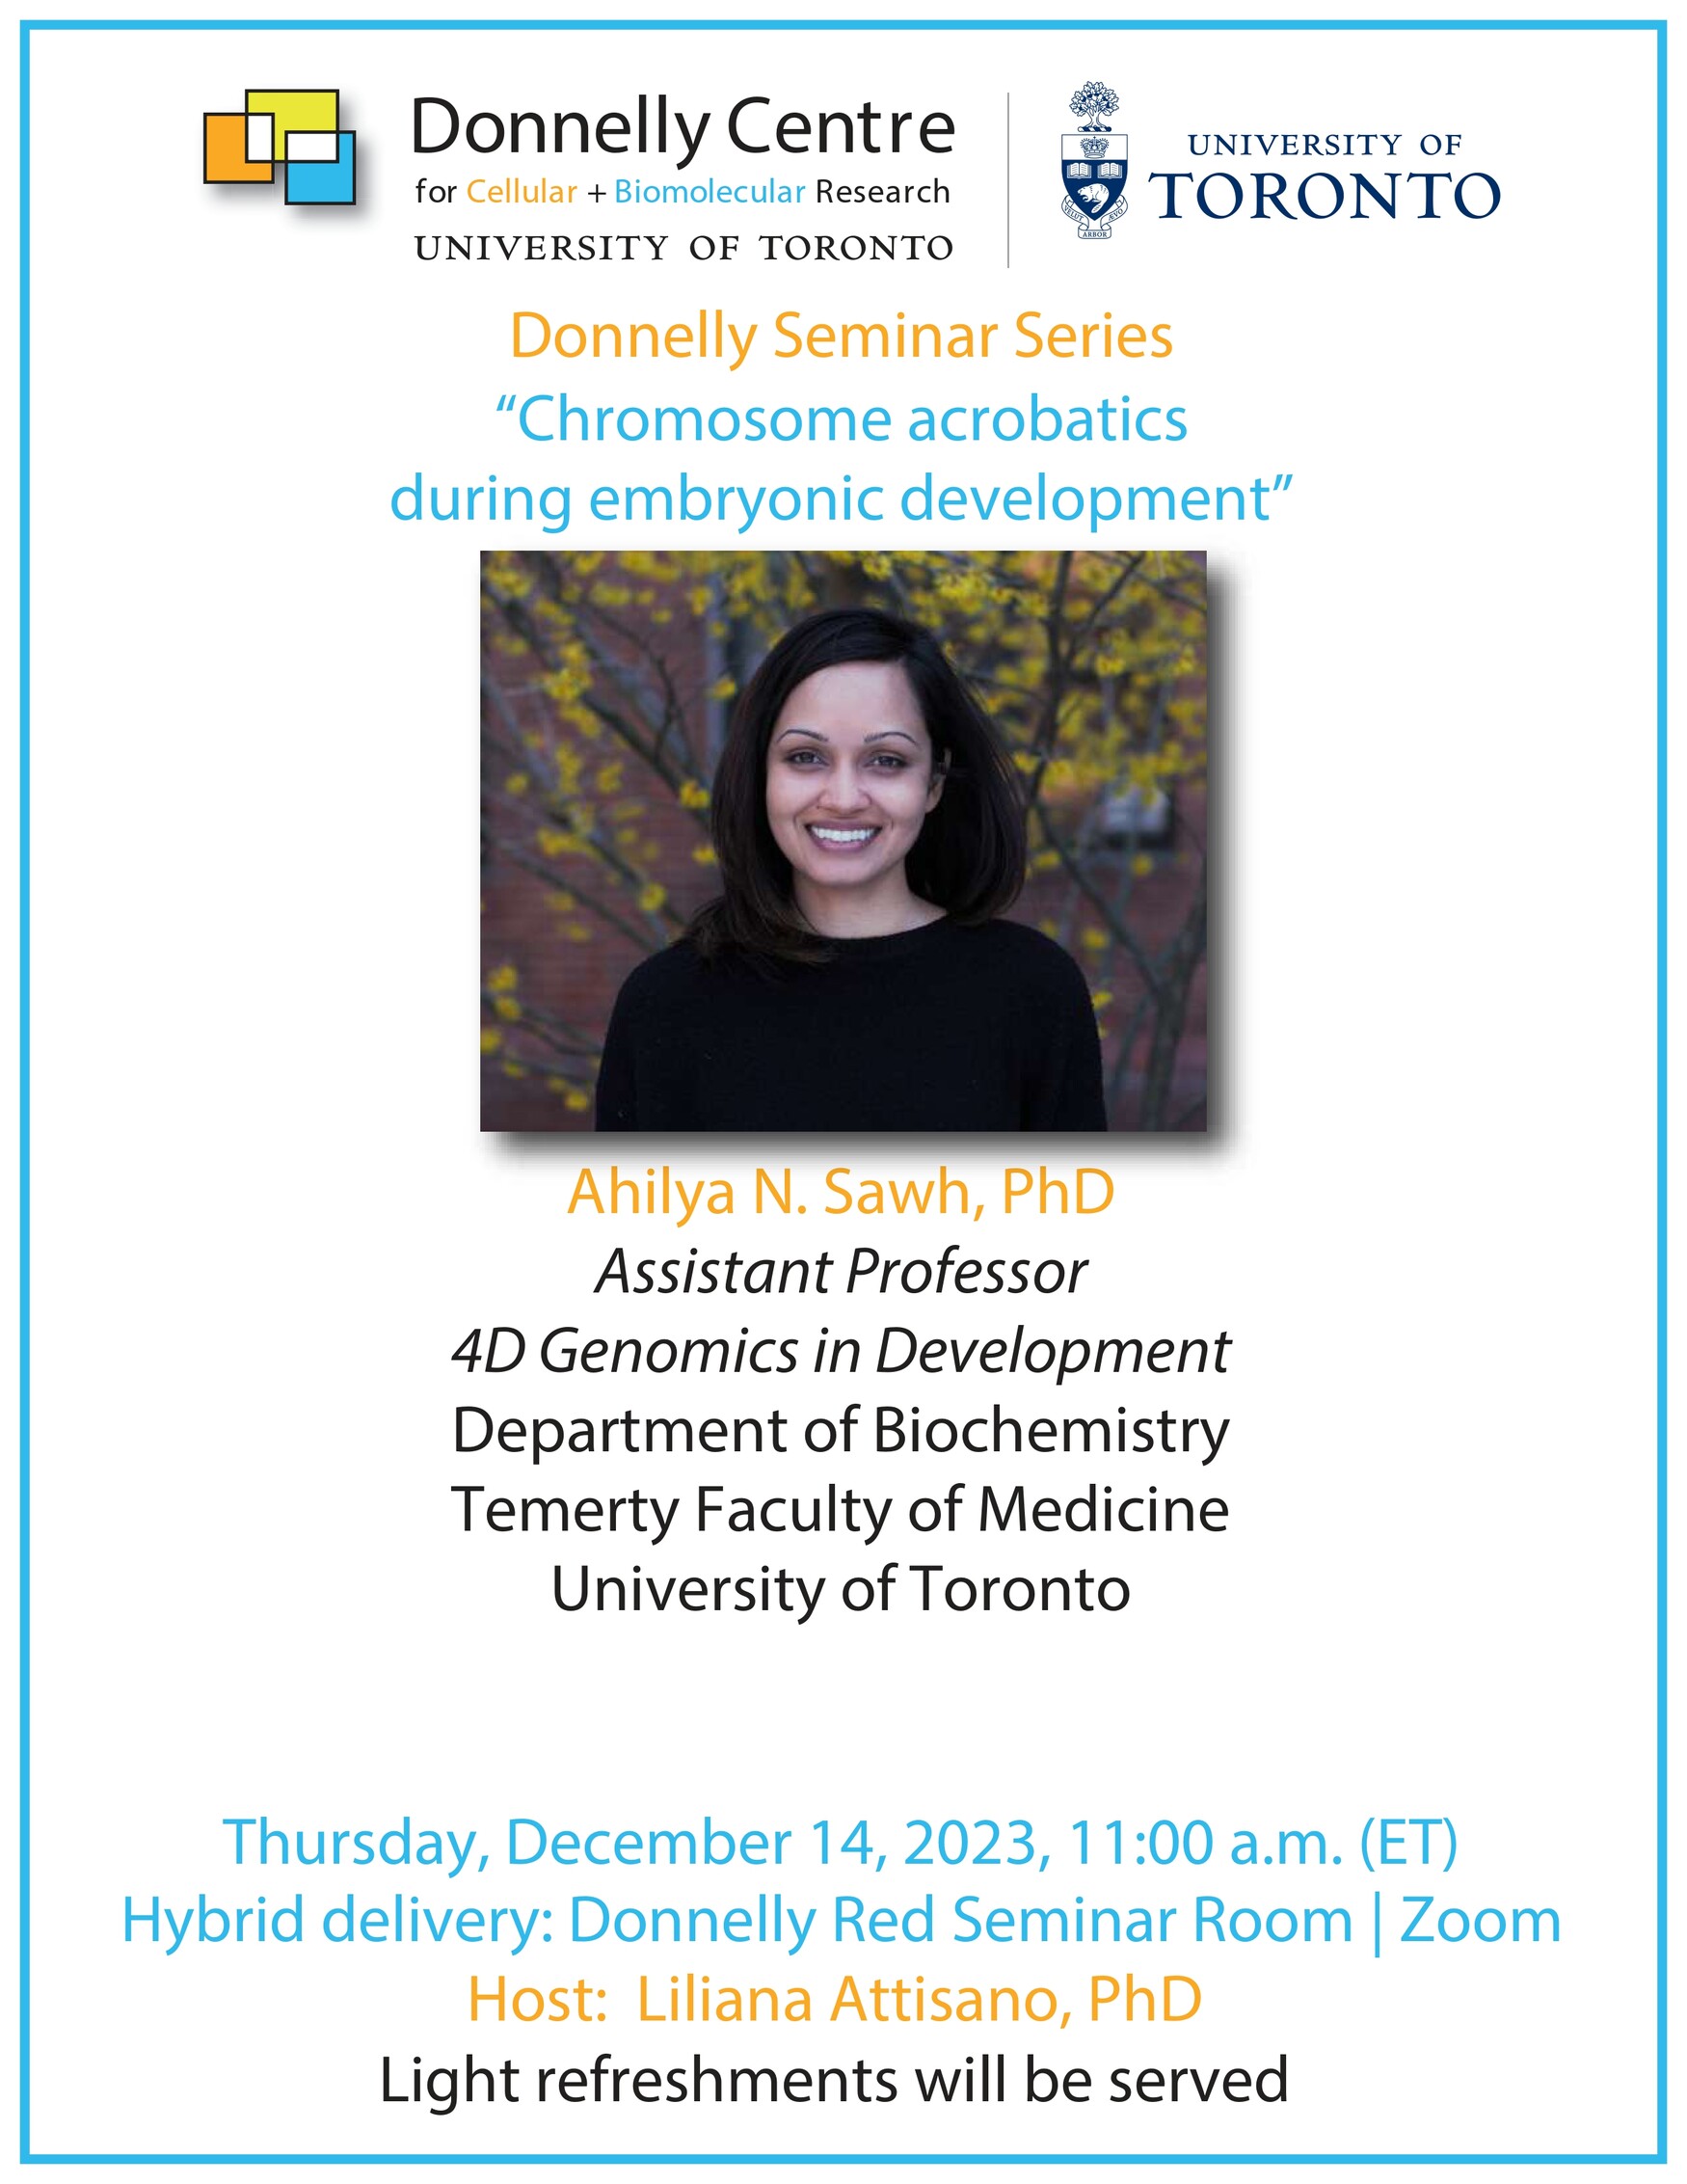 Poster for Donnelly Centre Seminar on "Chromosome acrobatics during embryonic development"